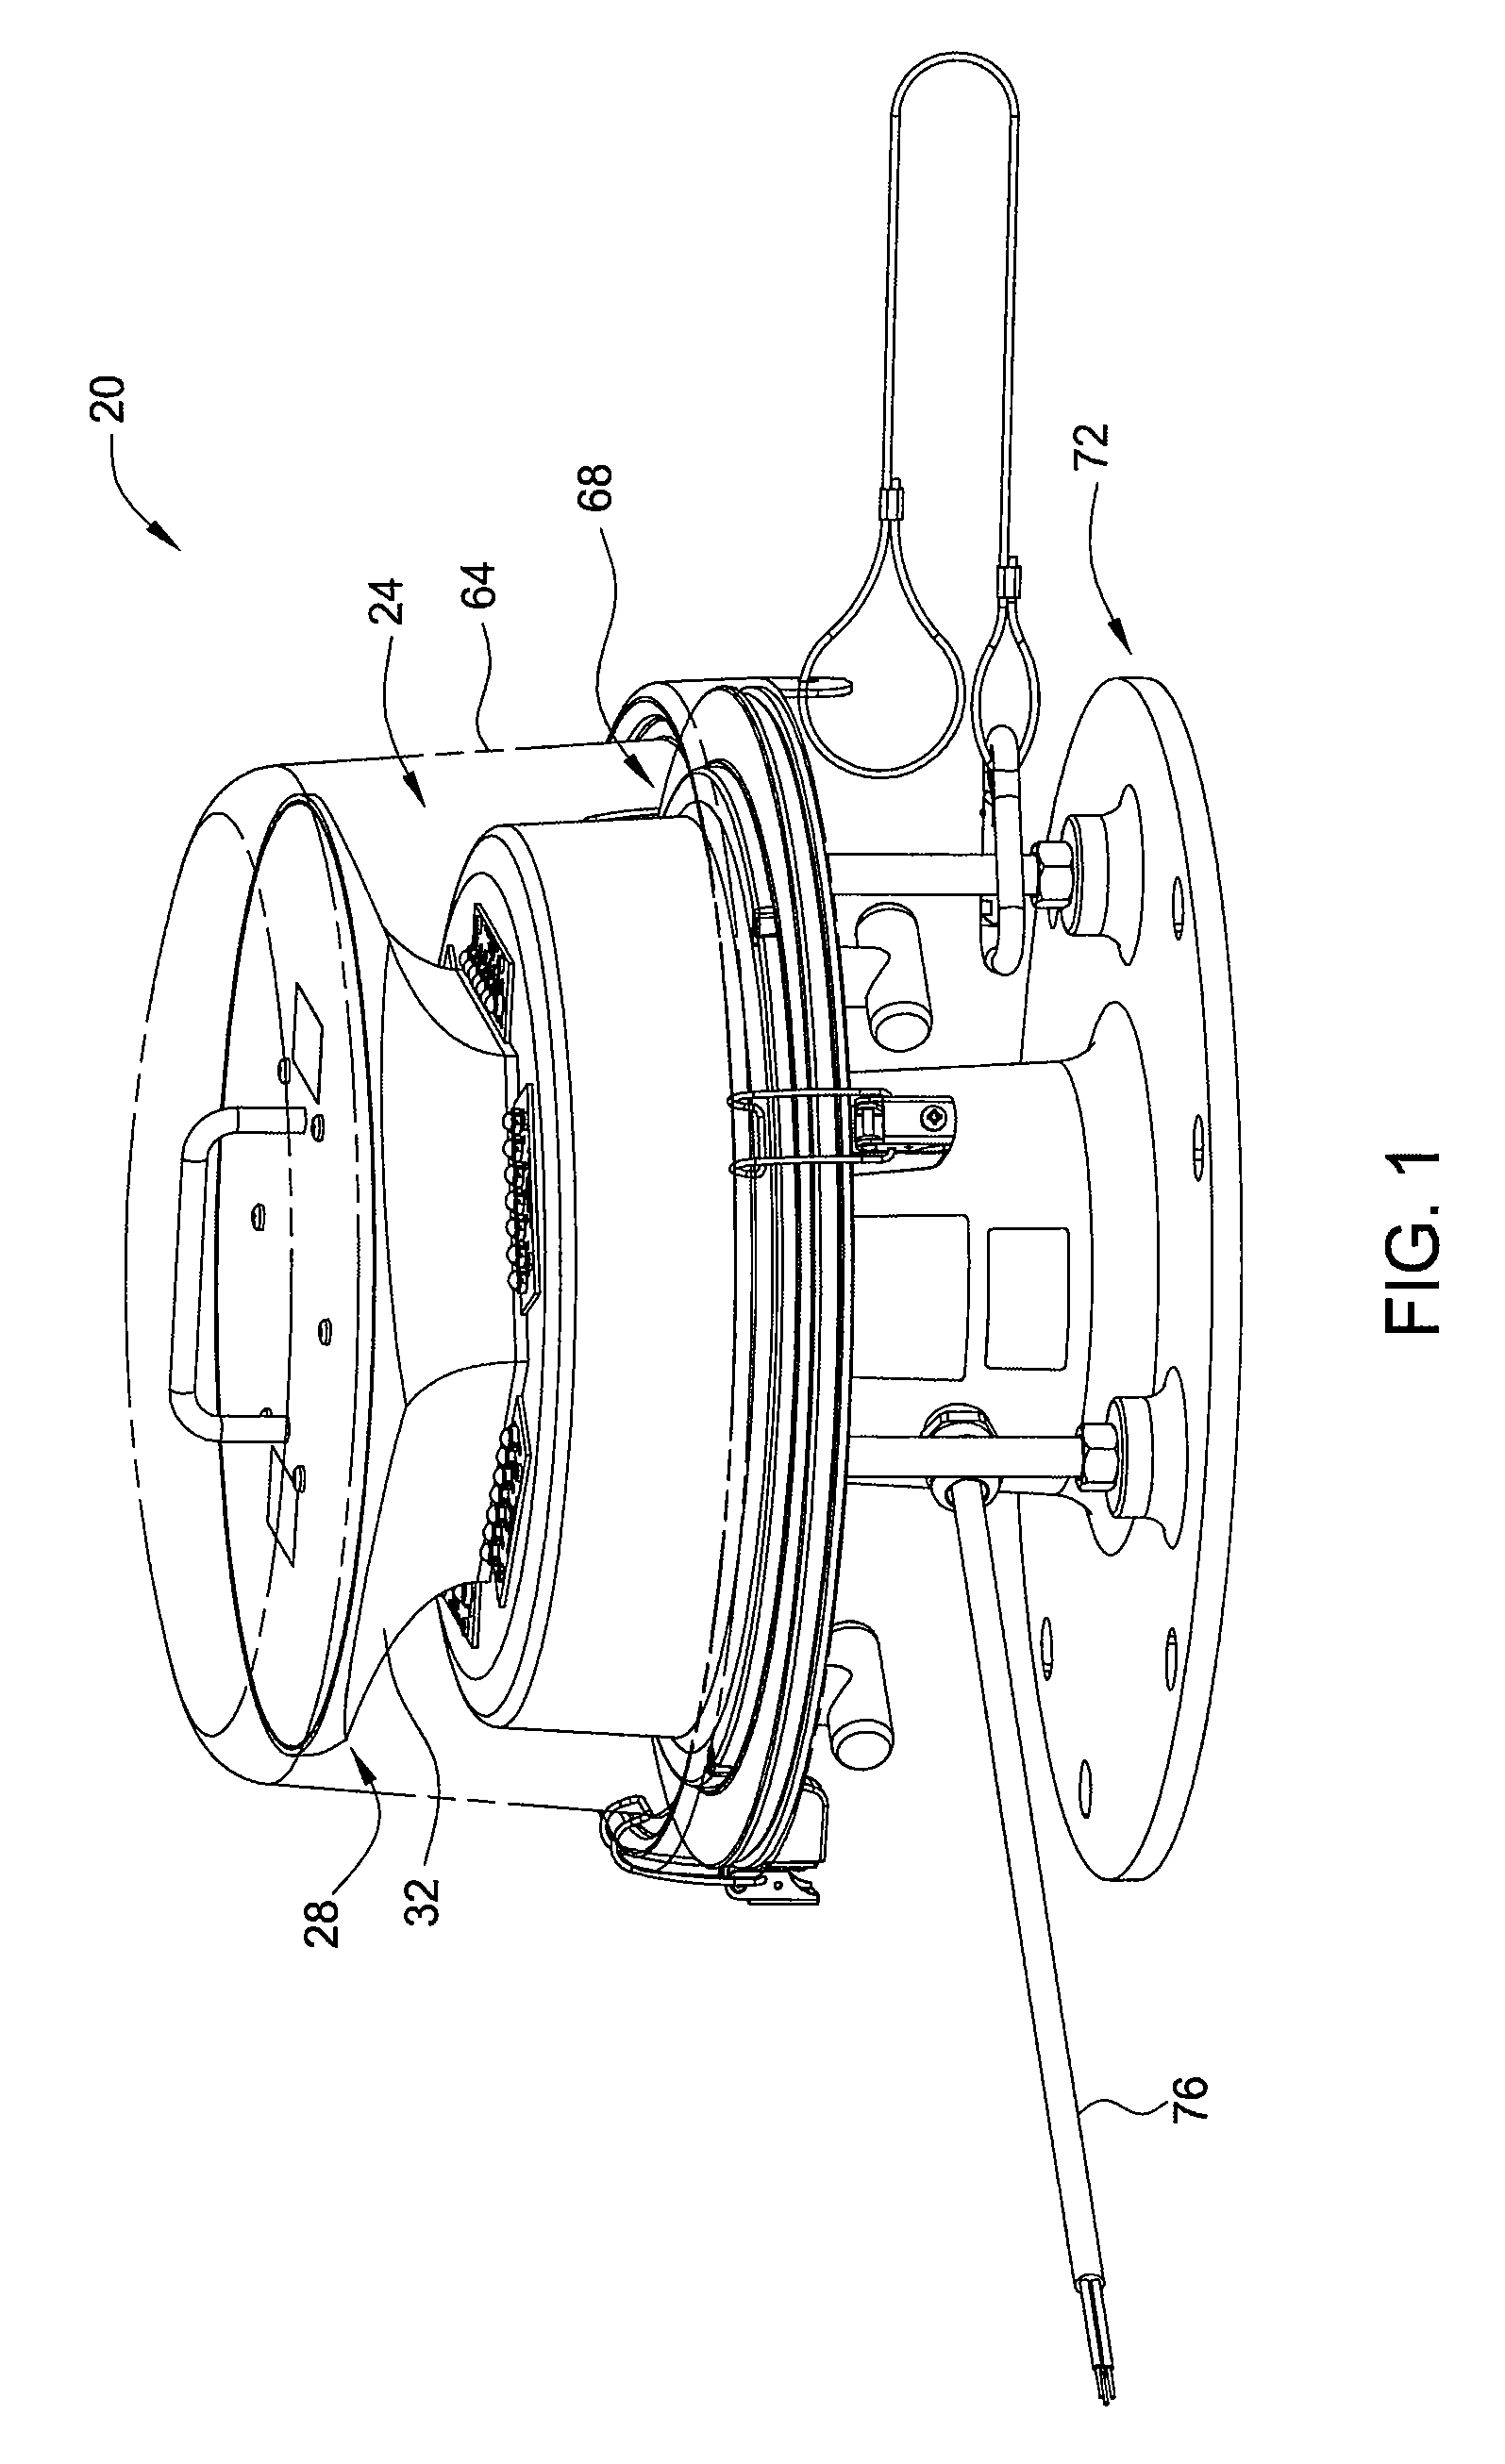 Beacon light with reflector and light emitting diodes